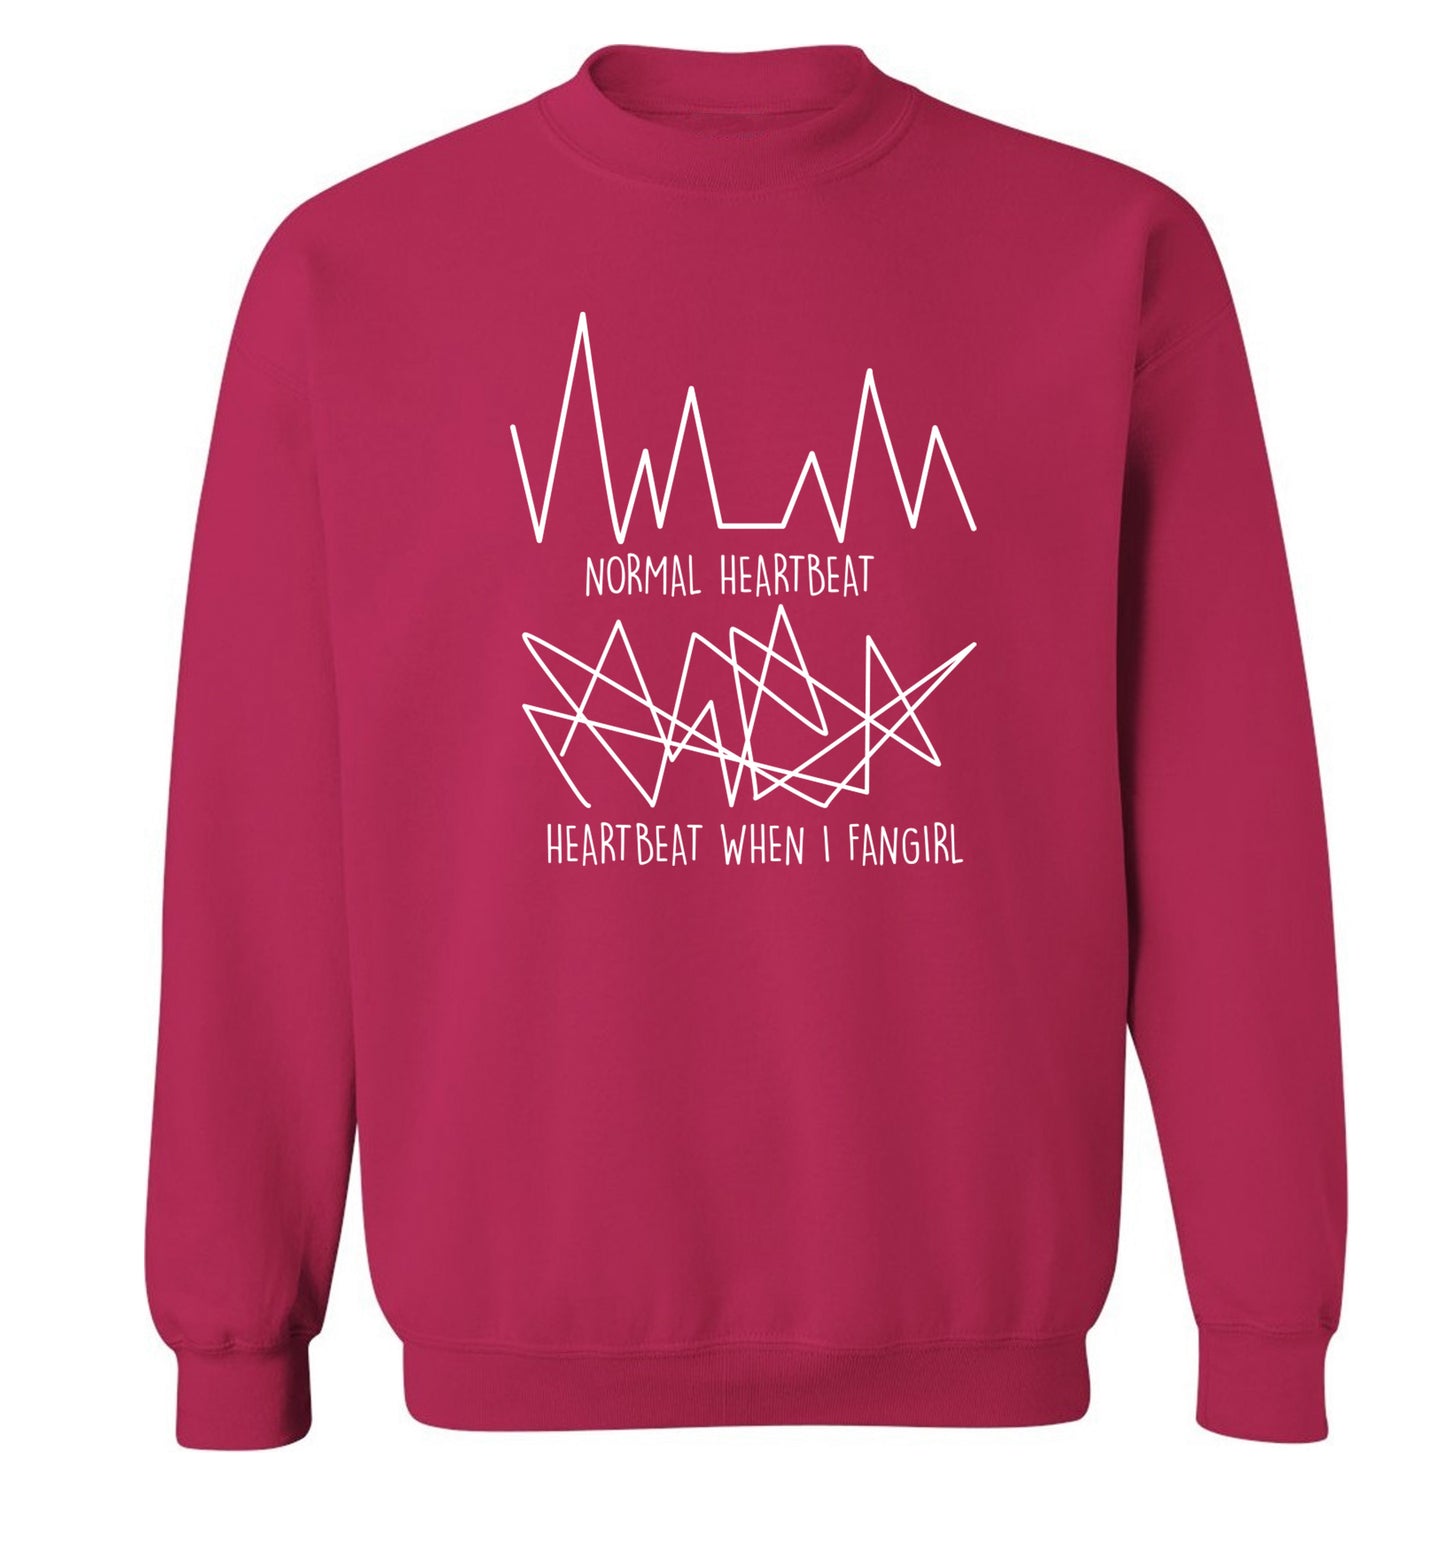 Normal heartbeat heartbeat when I fangirl Adult's unisex pink Sweater 2XL